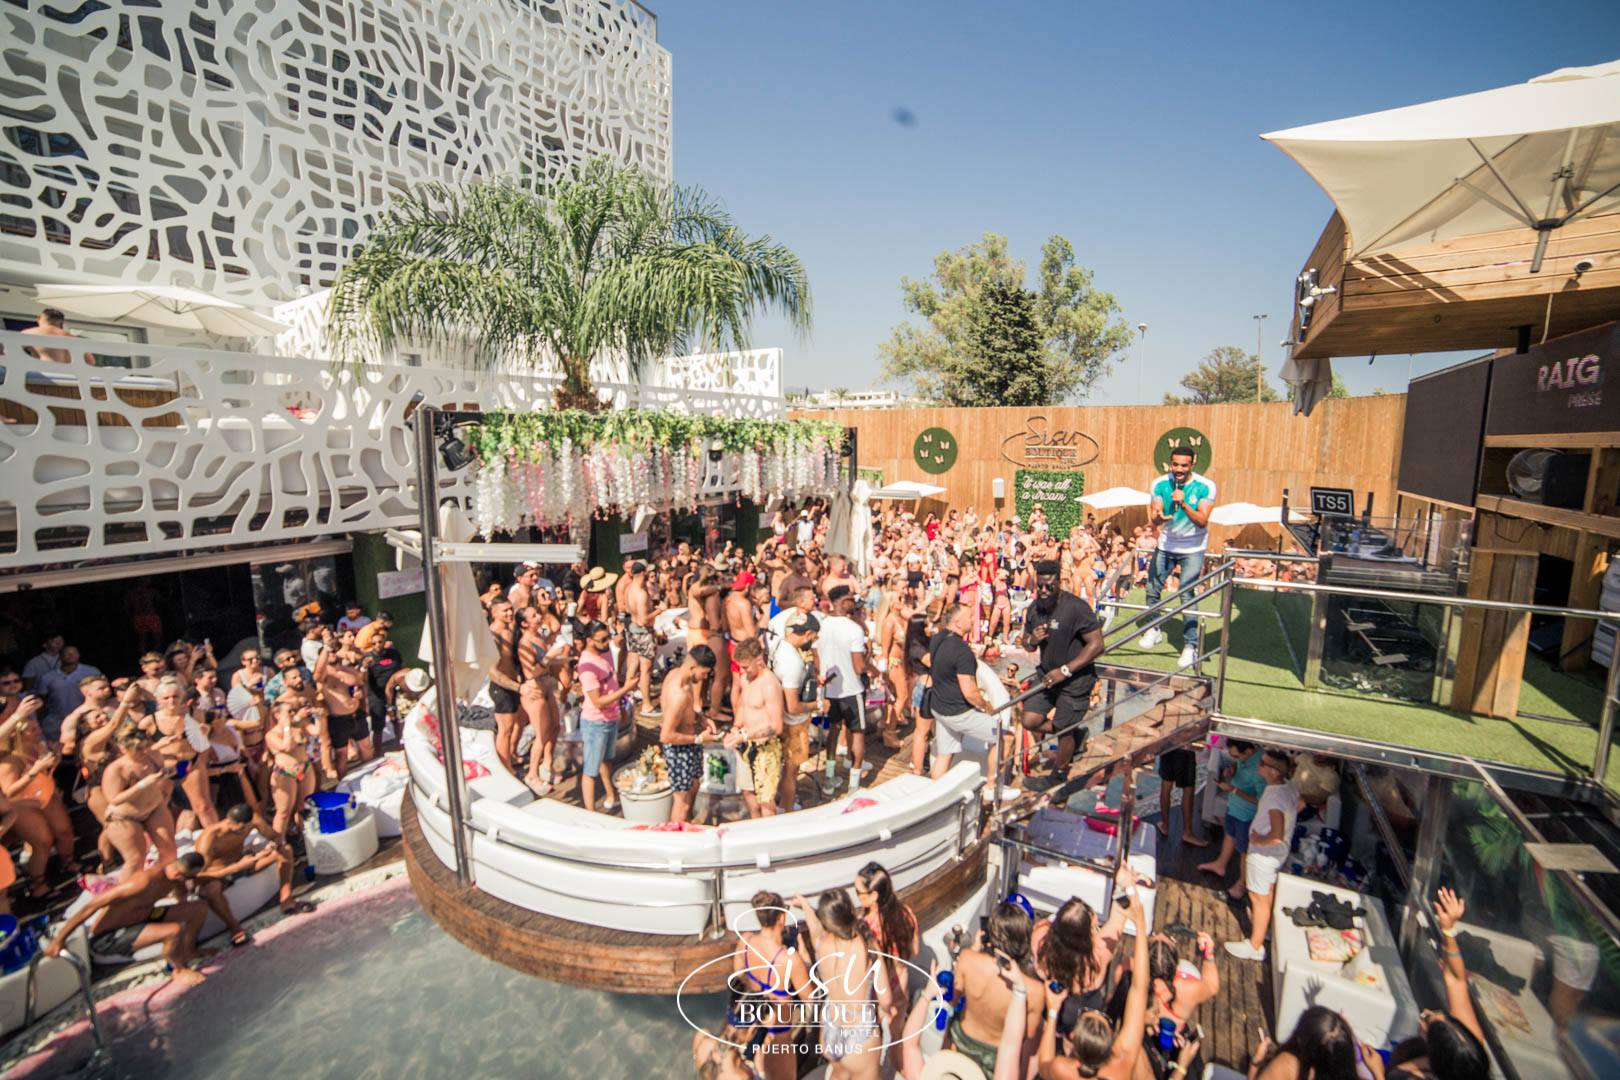 Puerto Banus: An Inside Scoop on the Hippest Beach Parties, Bars